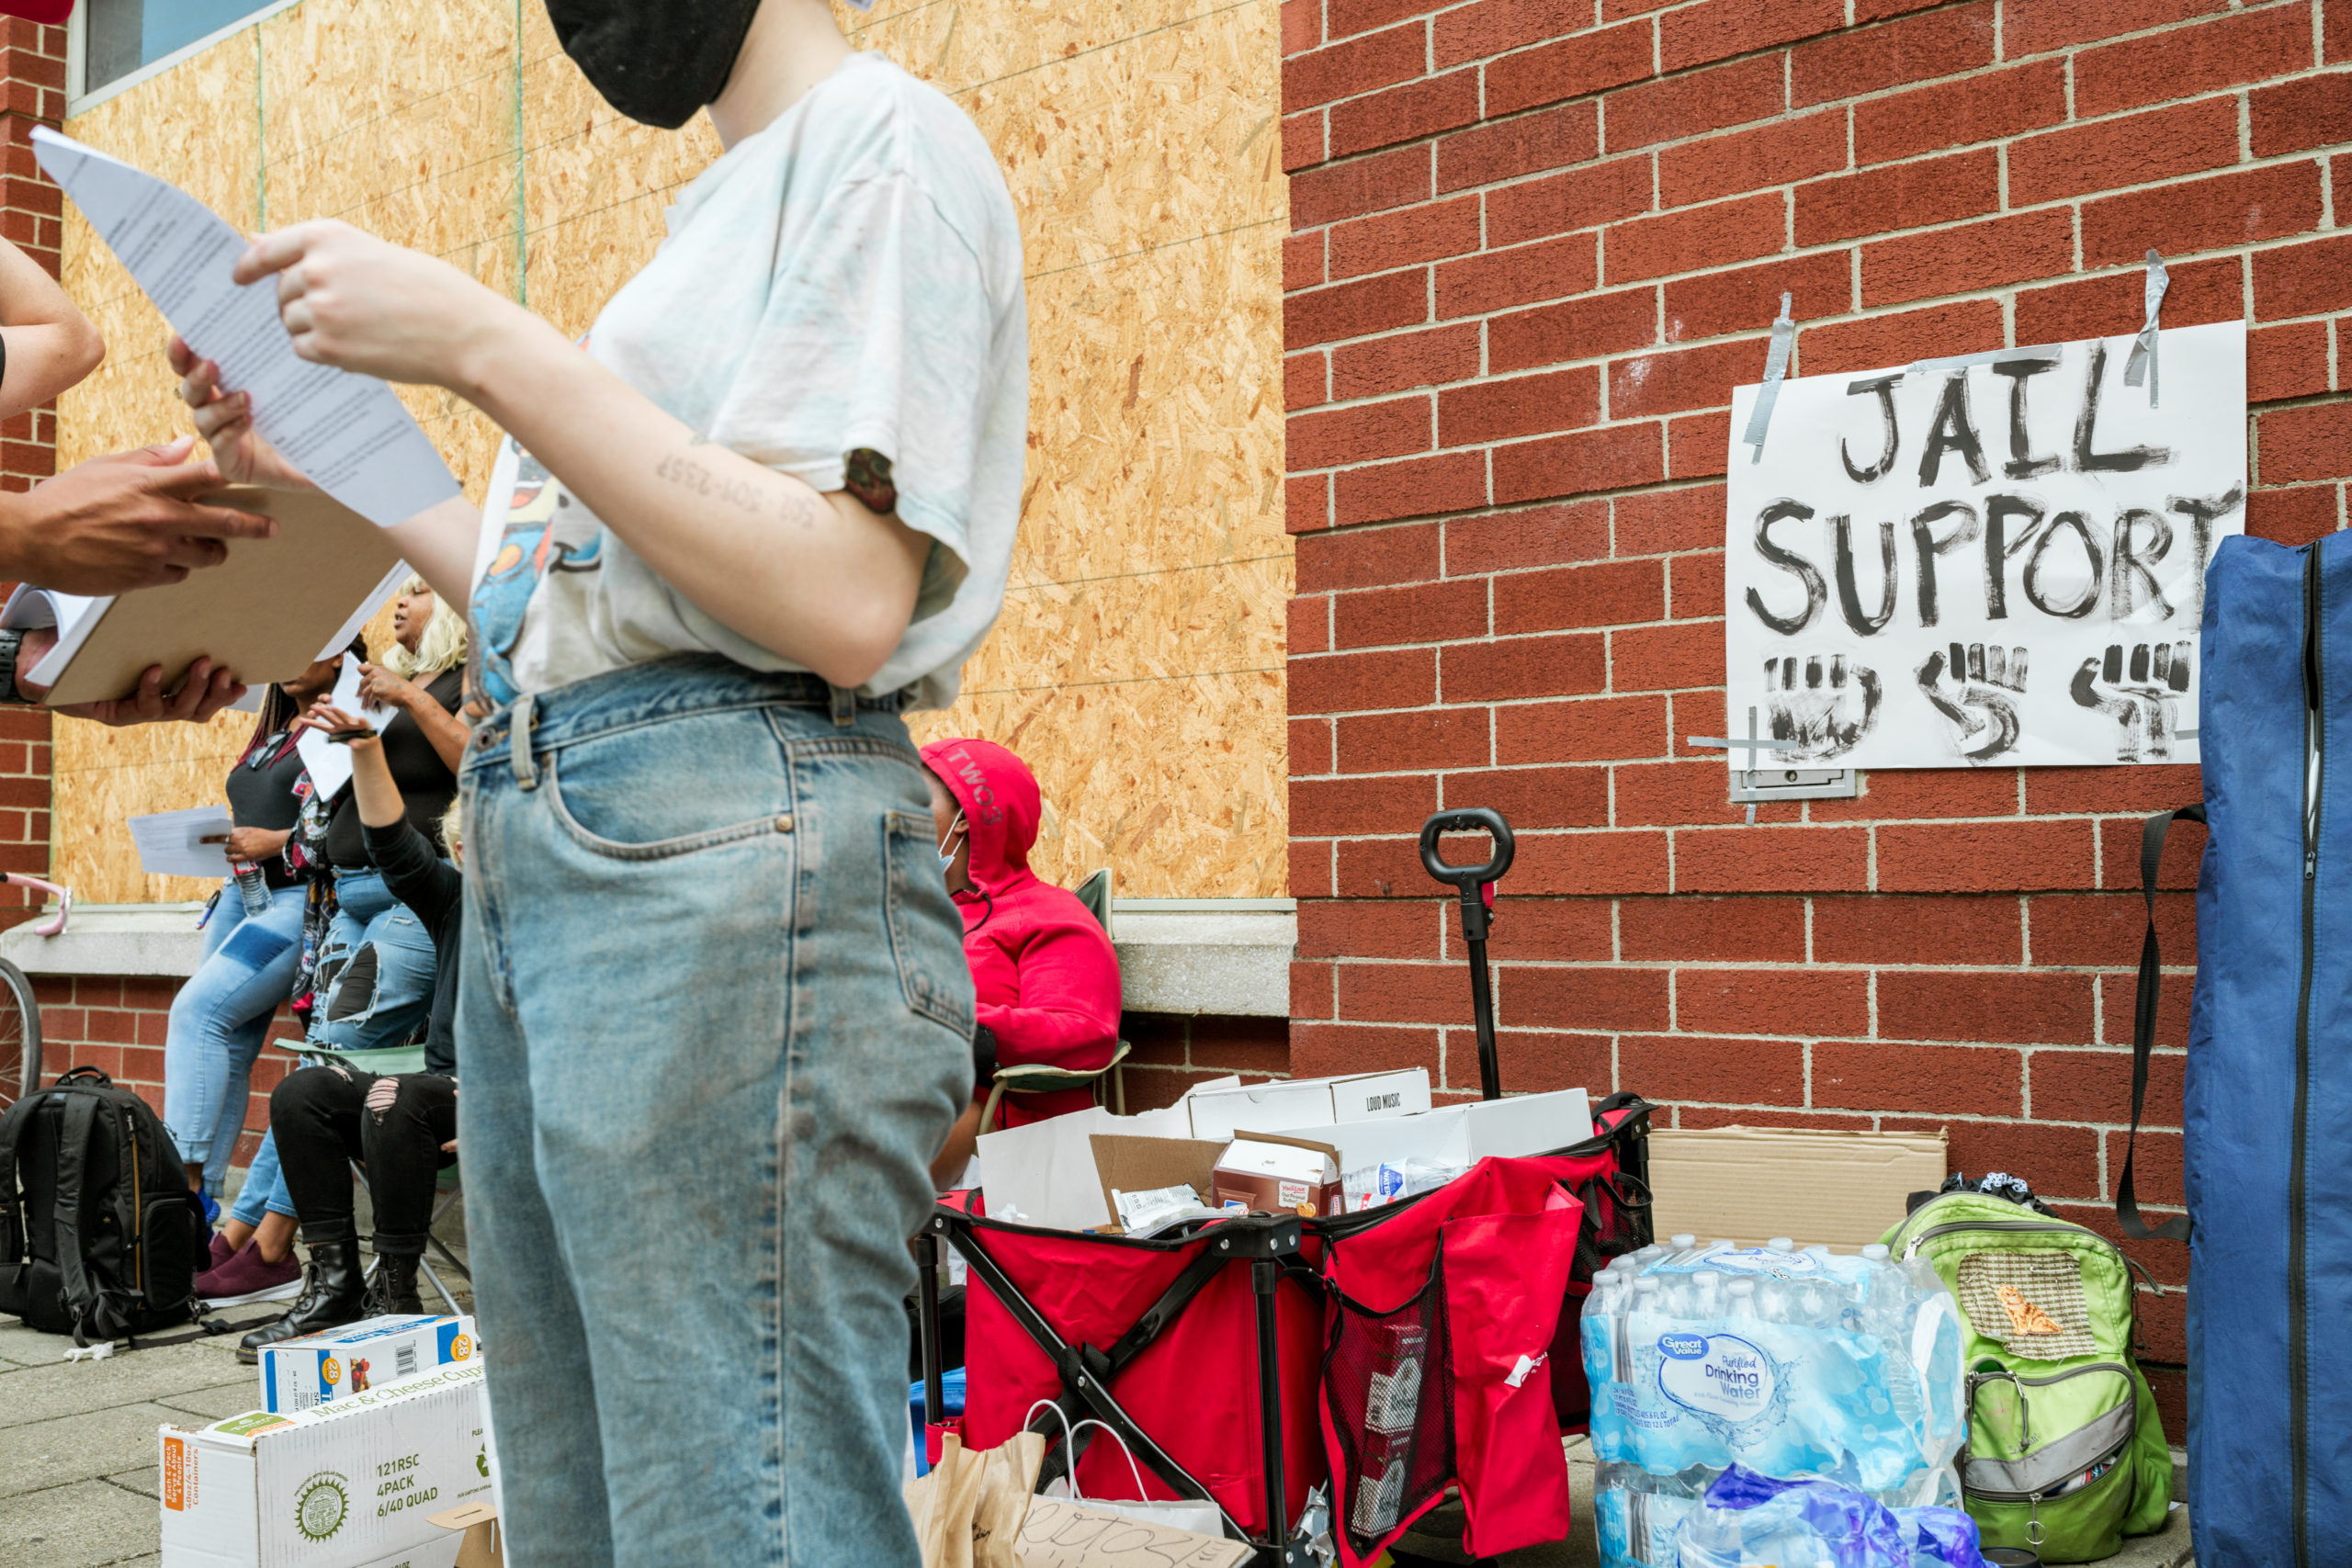 Protesters organize supplies to support demonstrators recently released from jail on September 24, 2020 in Louisville, Kentucky. (Jon Cherry/Getty Images)